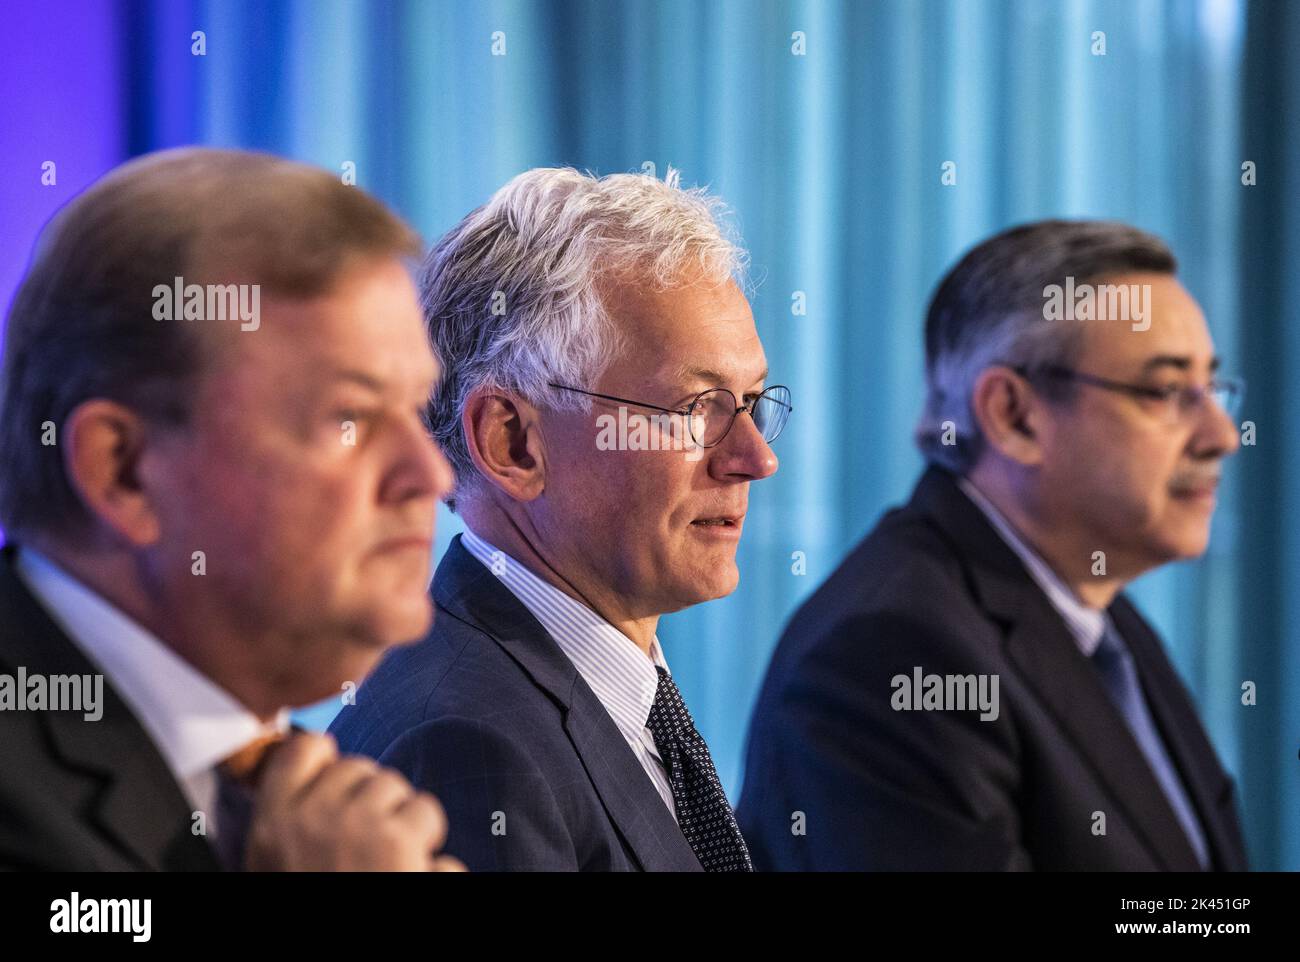 2022-09-30 09:23:55 AMSTERDAM - Former CEO Frans van Houten of Koninklijke Philips NV before the start of an extraordinary shareholders' meeting of Philips. ANP EVA PLEVIER netherlands out - belgium out Stock Photo